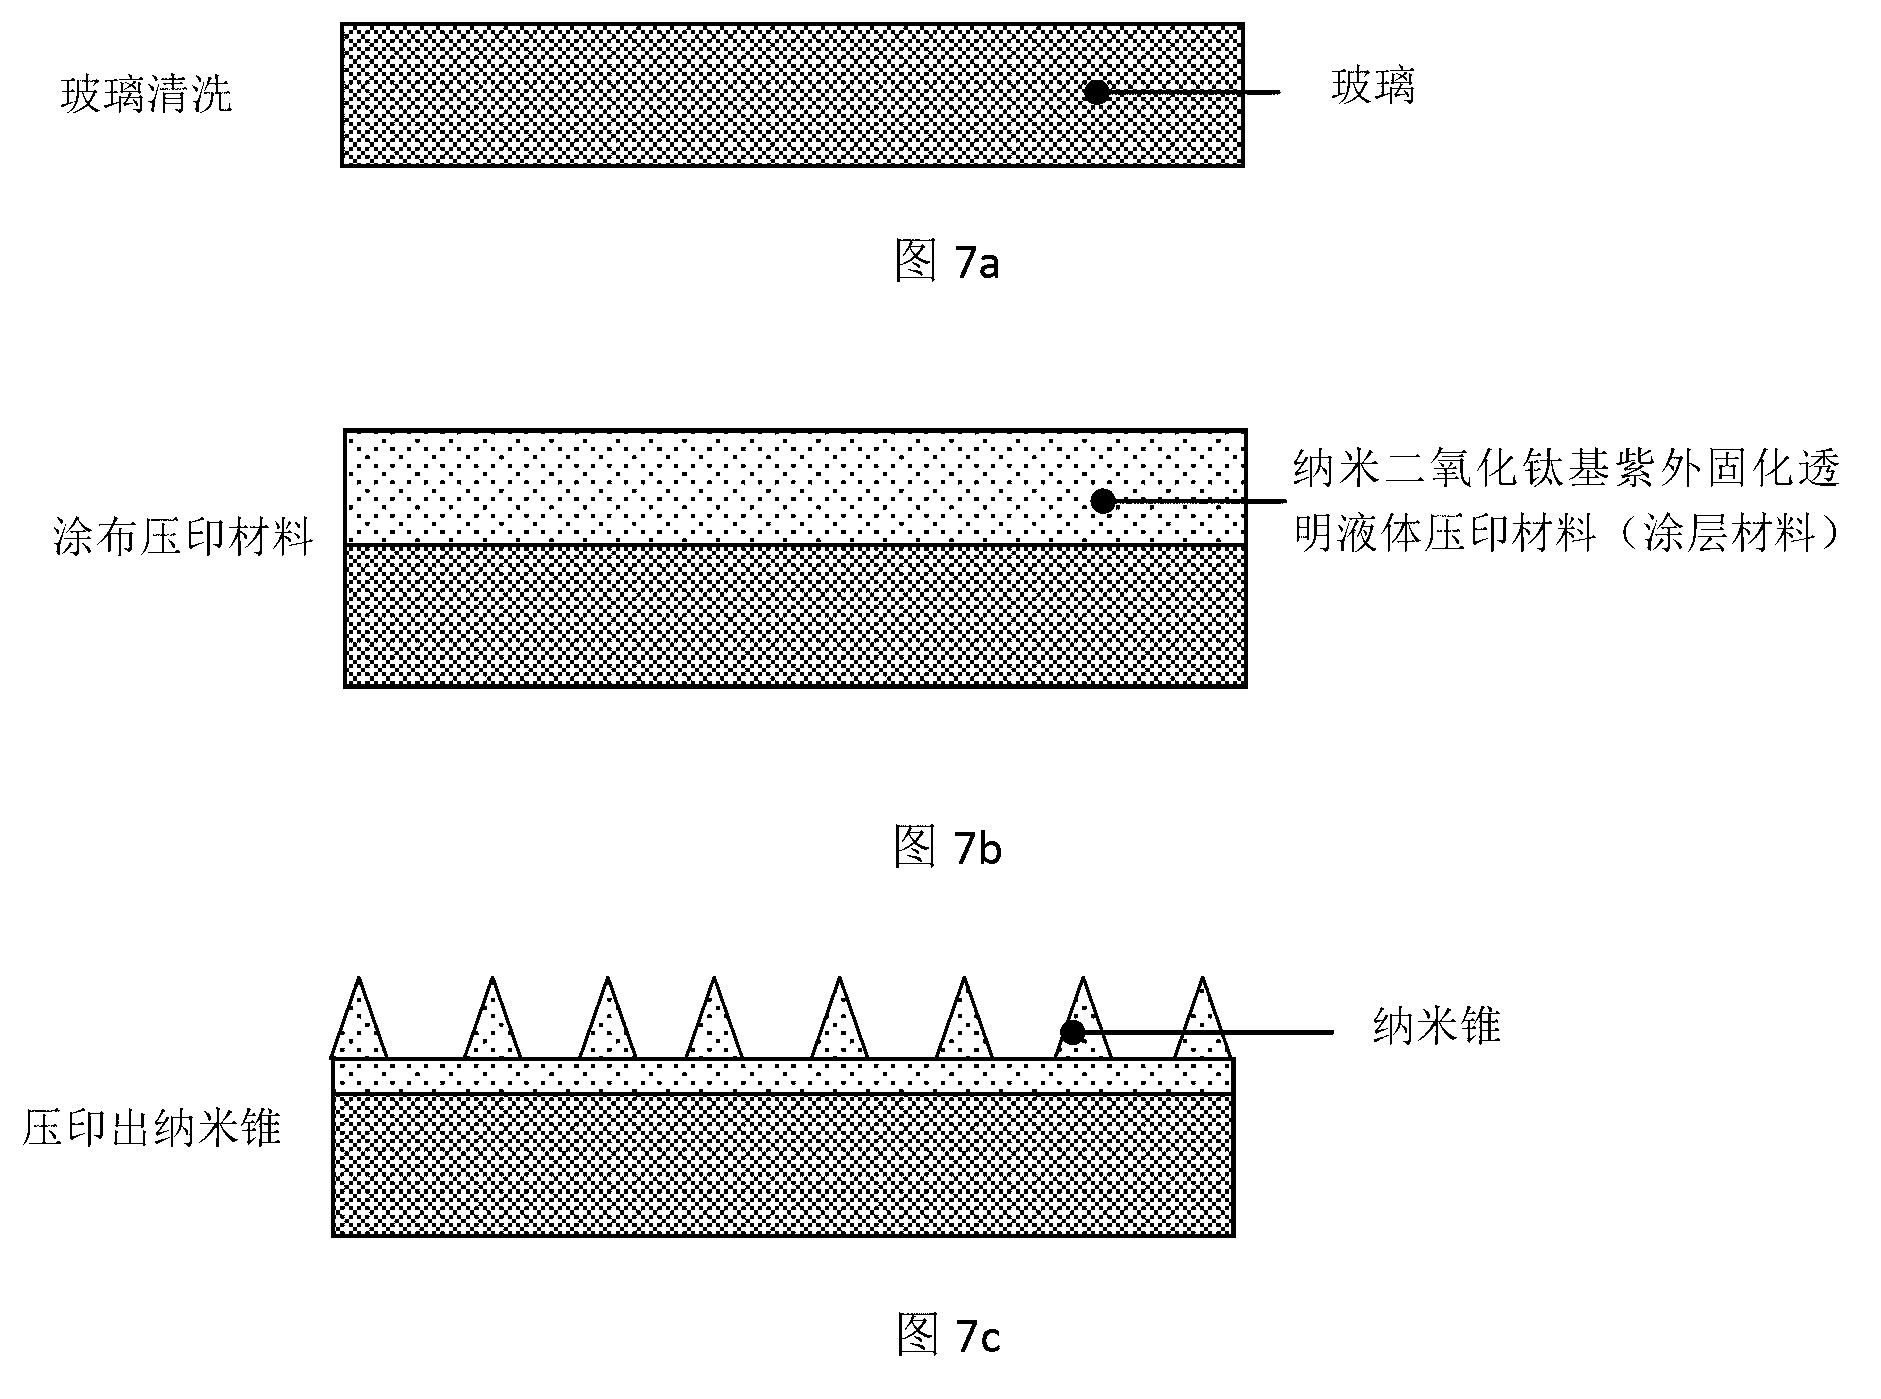 Anti-reflection and self-cleaning glass and manufacturing method thereof